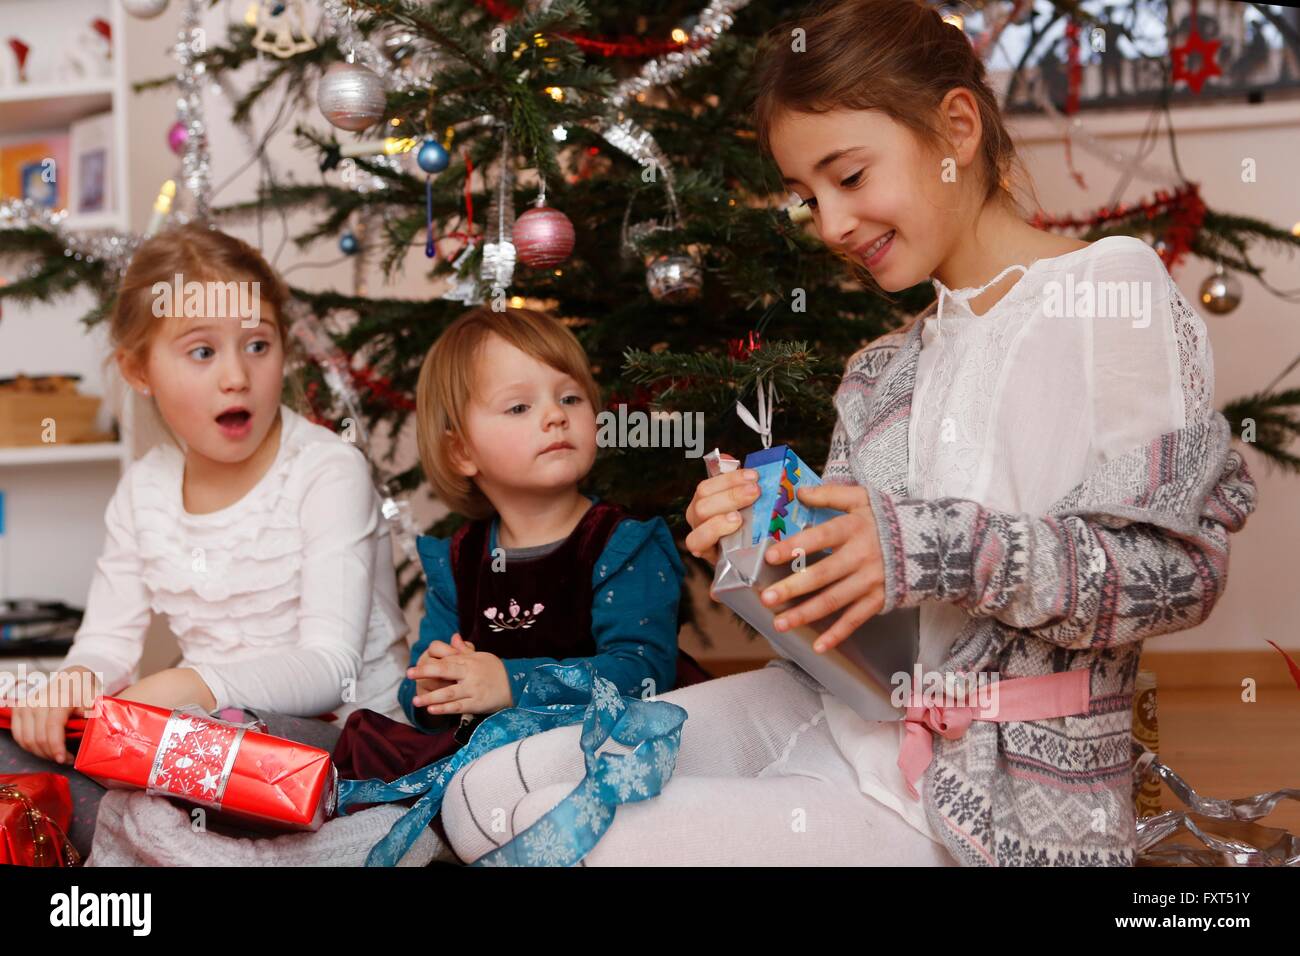 Girls in front of christmas tree opening gifts Stock Photo